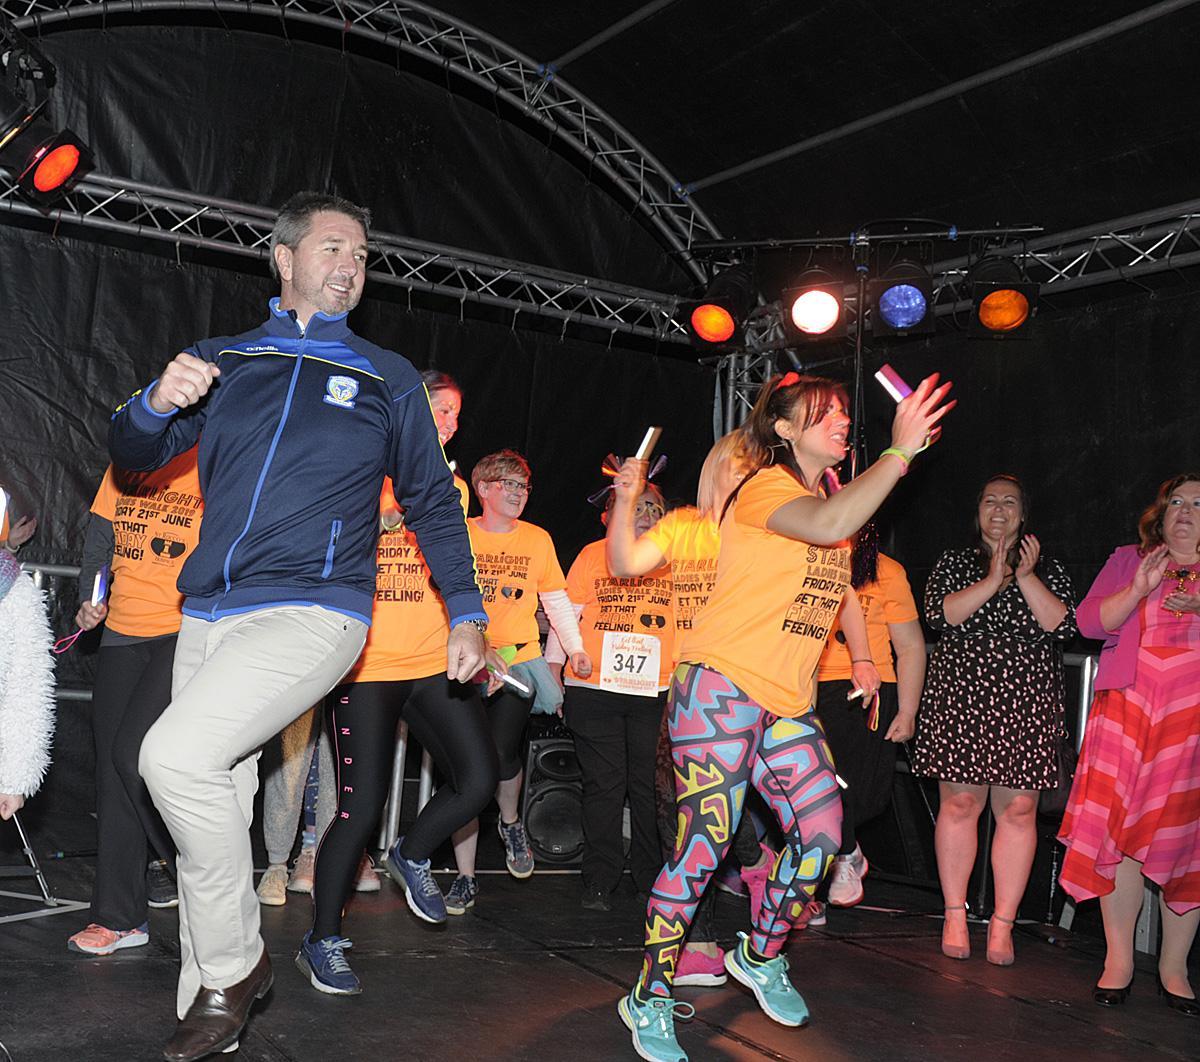 Steve Price entertains the crowds at the 2019 St Roccos Starlight Walk. Picture by Mike Boden